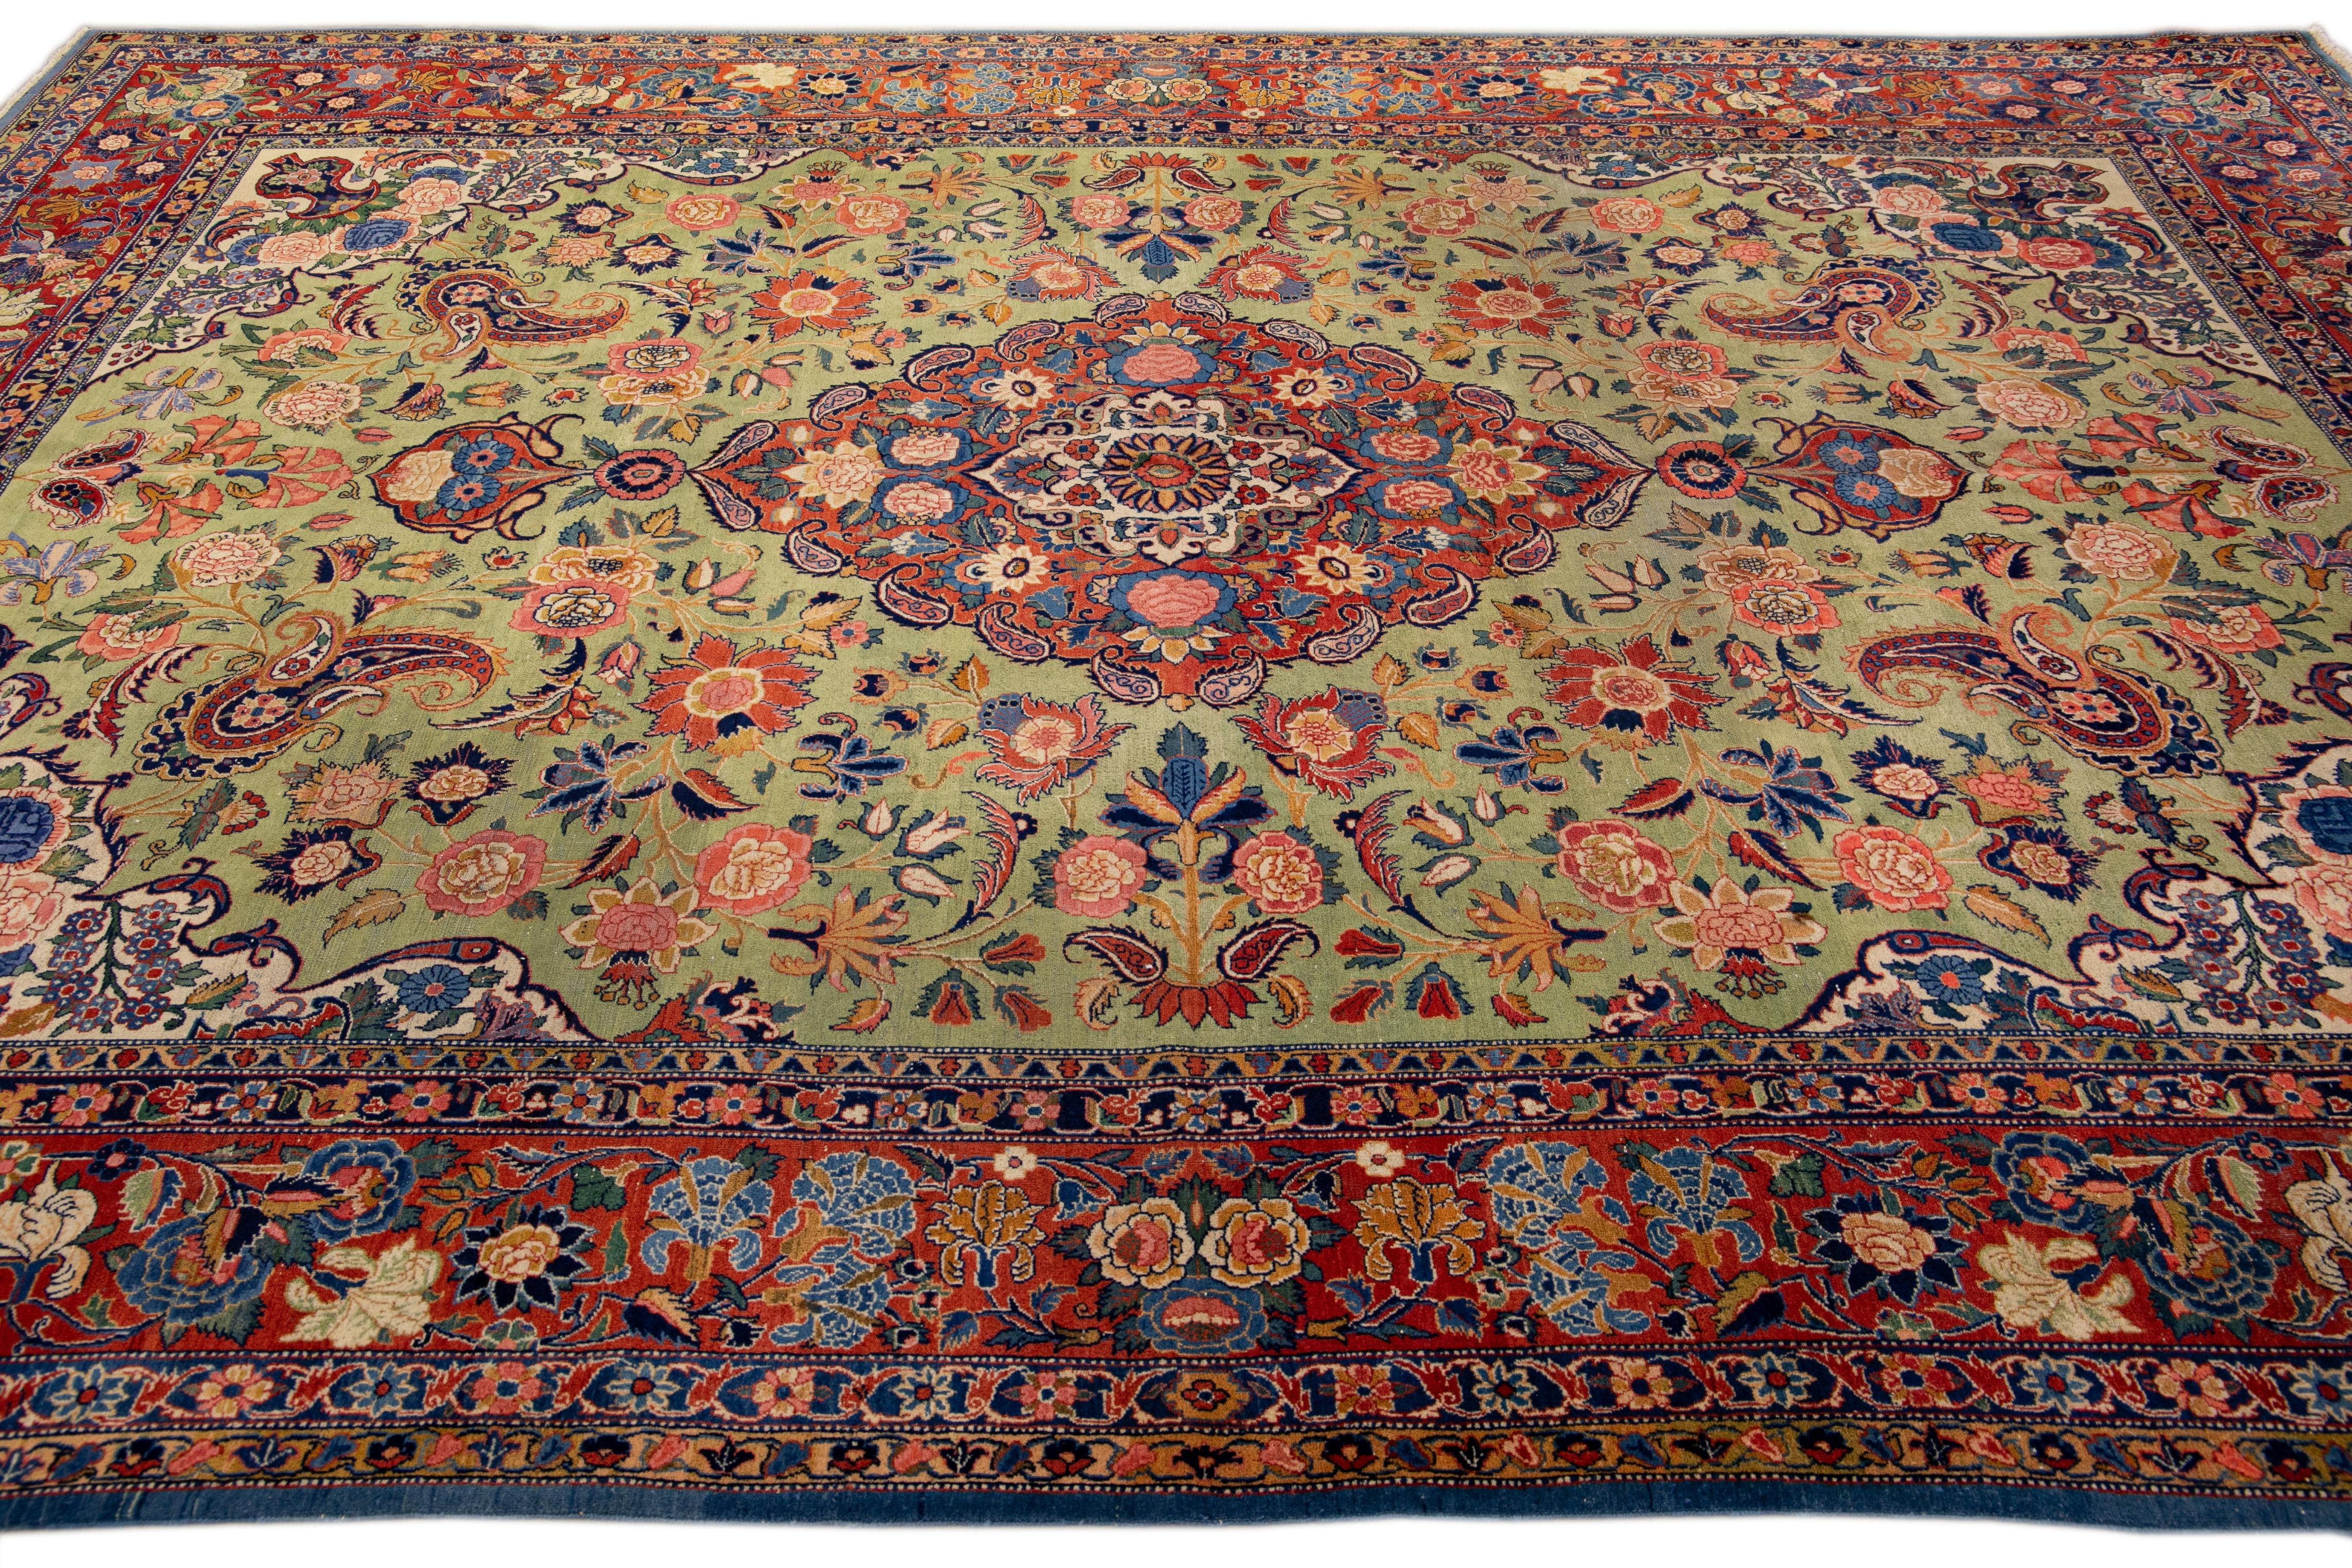 This Persian rug is made of wool and is hand-knotted in the antique Kashan. The green field is complemented by a beautiful all-over medallion floral design with multicolor accents. The rusted frame adds to the rug's unique character and overall